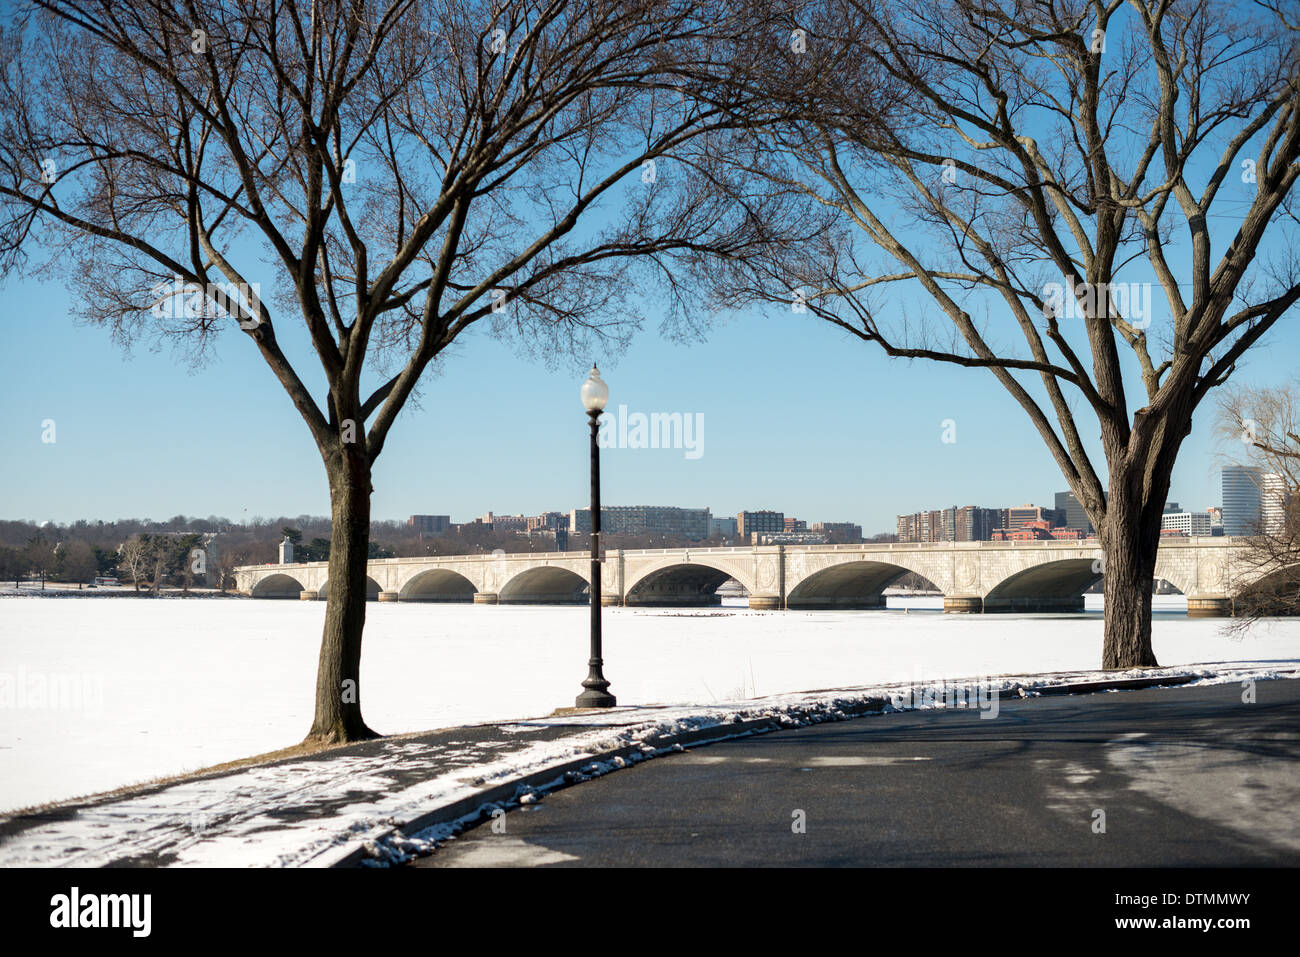 WASHINGTON DC, USA - The Potomac running through Washington DC is frozen and covered with a layer of snow. The region has experienced an unusually cold winter, with sustained low temperatures. Stock Photo